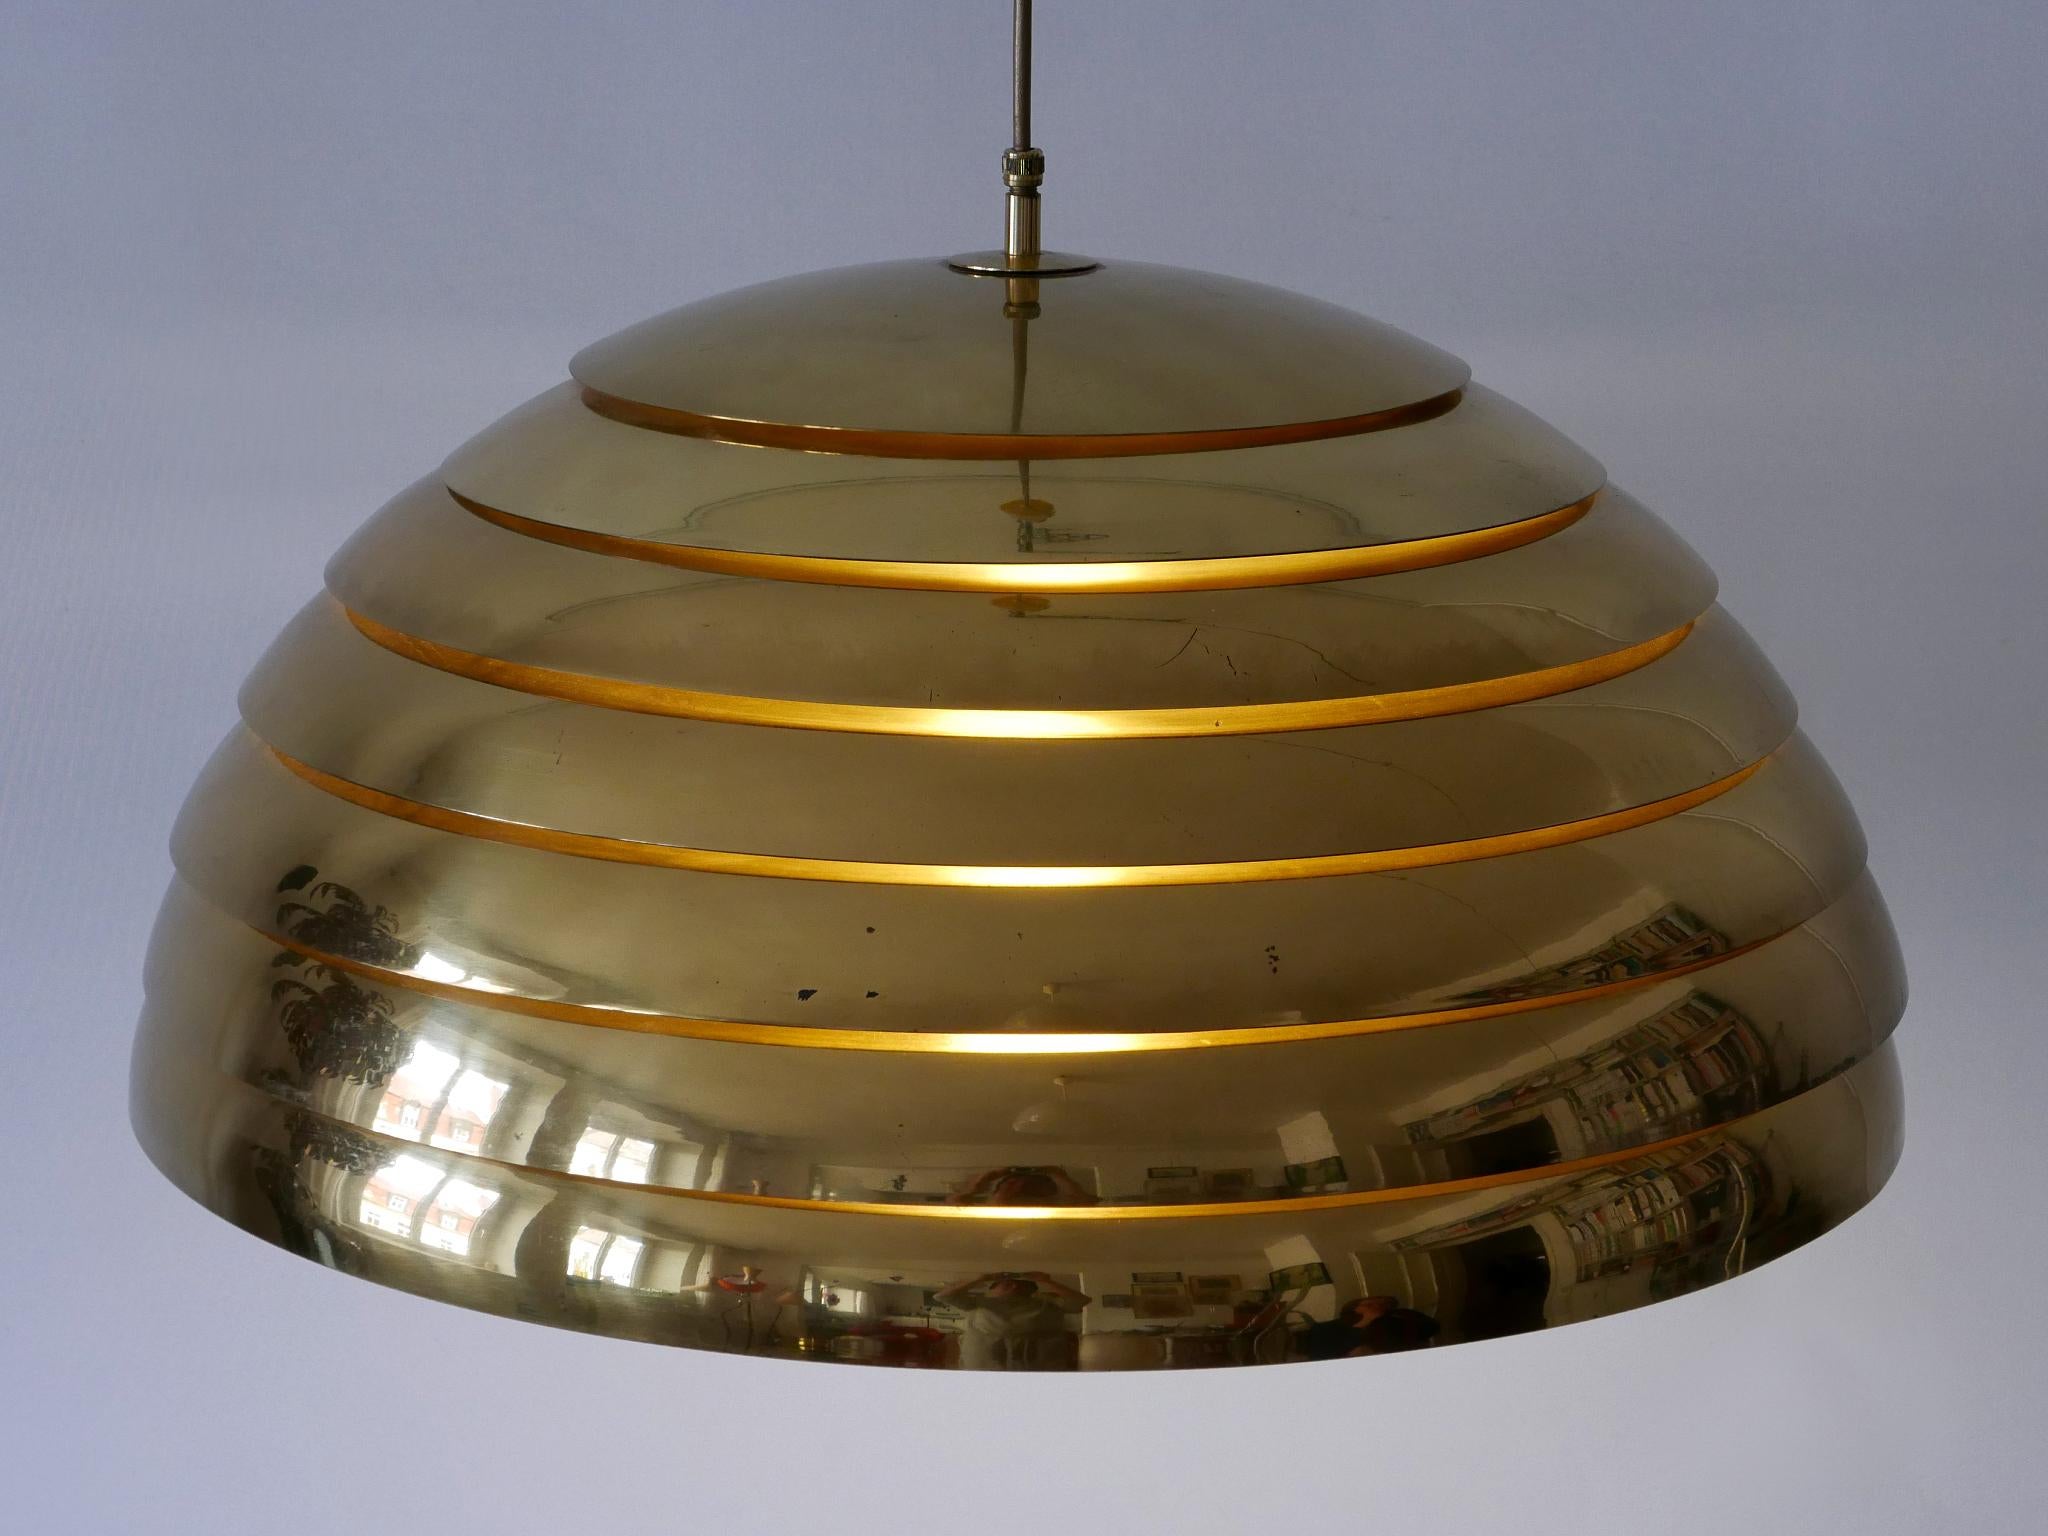 Large and elegant Mid-Century Modern brass pendant lamp or hanging light. Suits perfect for a dining table. Designed and manufactured by Vereinigte Werkstätten München, Germany, 1960s.

Executed in brass and semi-opaque lucite, the pendant lamp